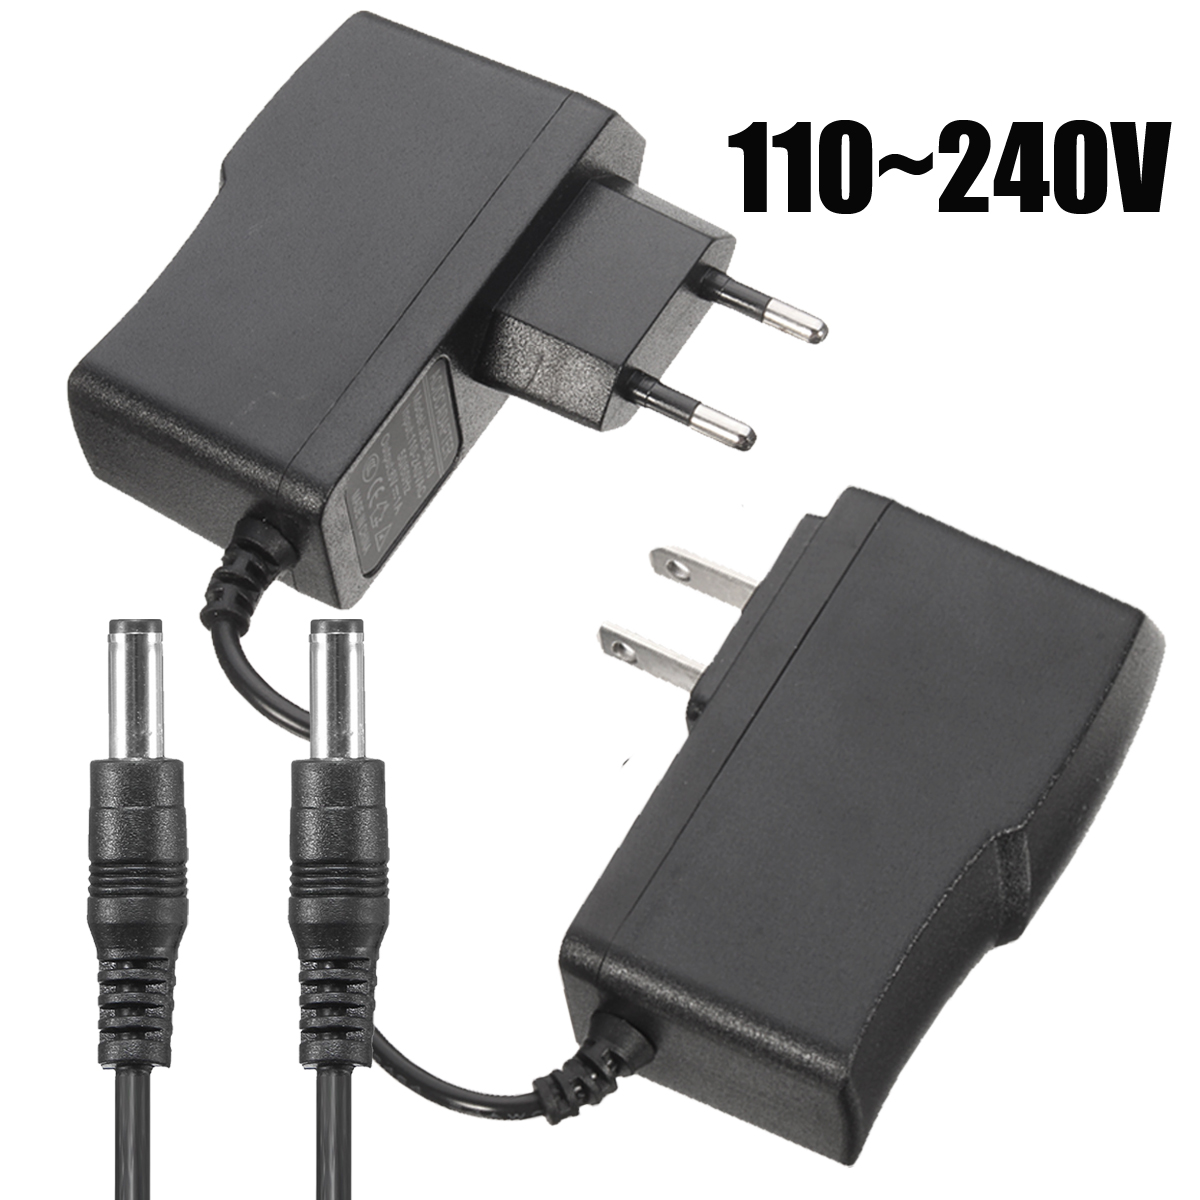 110-240V-USEU-Power-Supply-Charger-Adapter-Charger-For-Electric-Fruit-Potato-Vegetable-Skin-Peeler-1244288-2